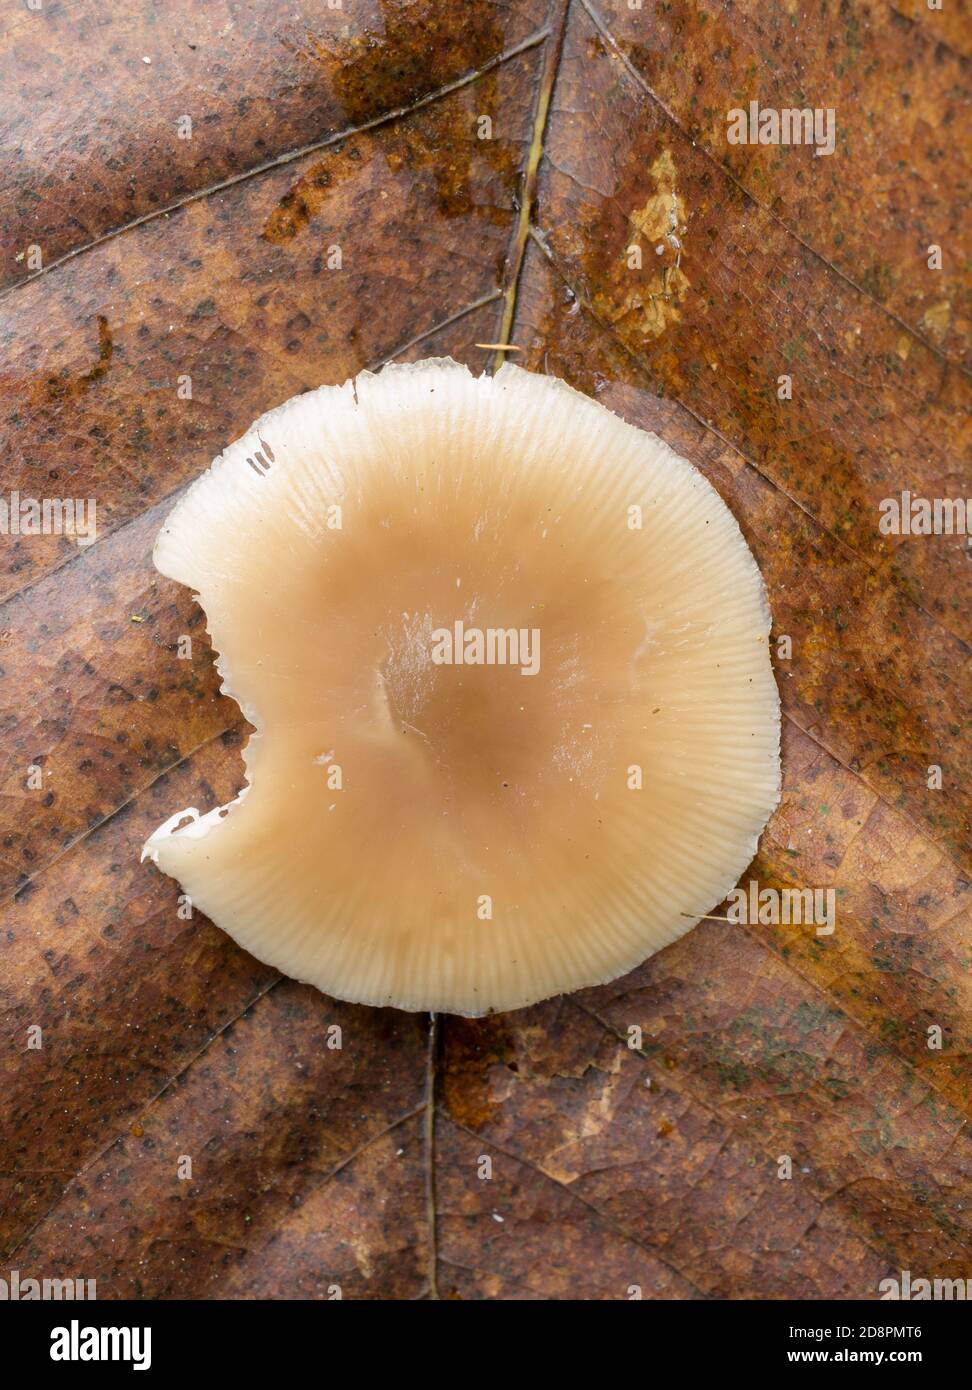 The underside or gills of the Entoloma strictius mushroom. Stock Photo